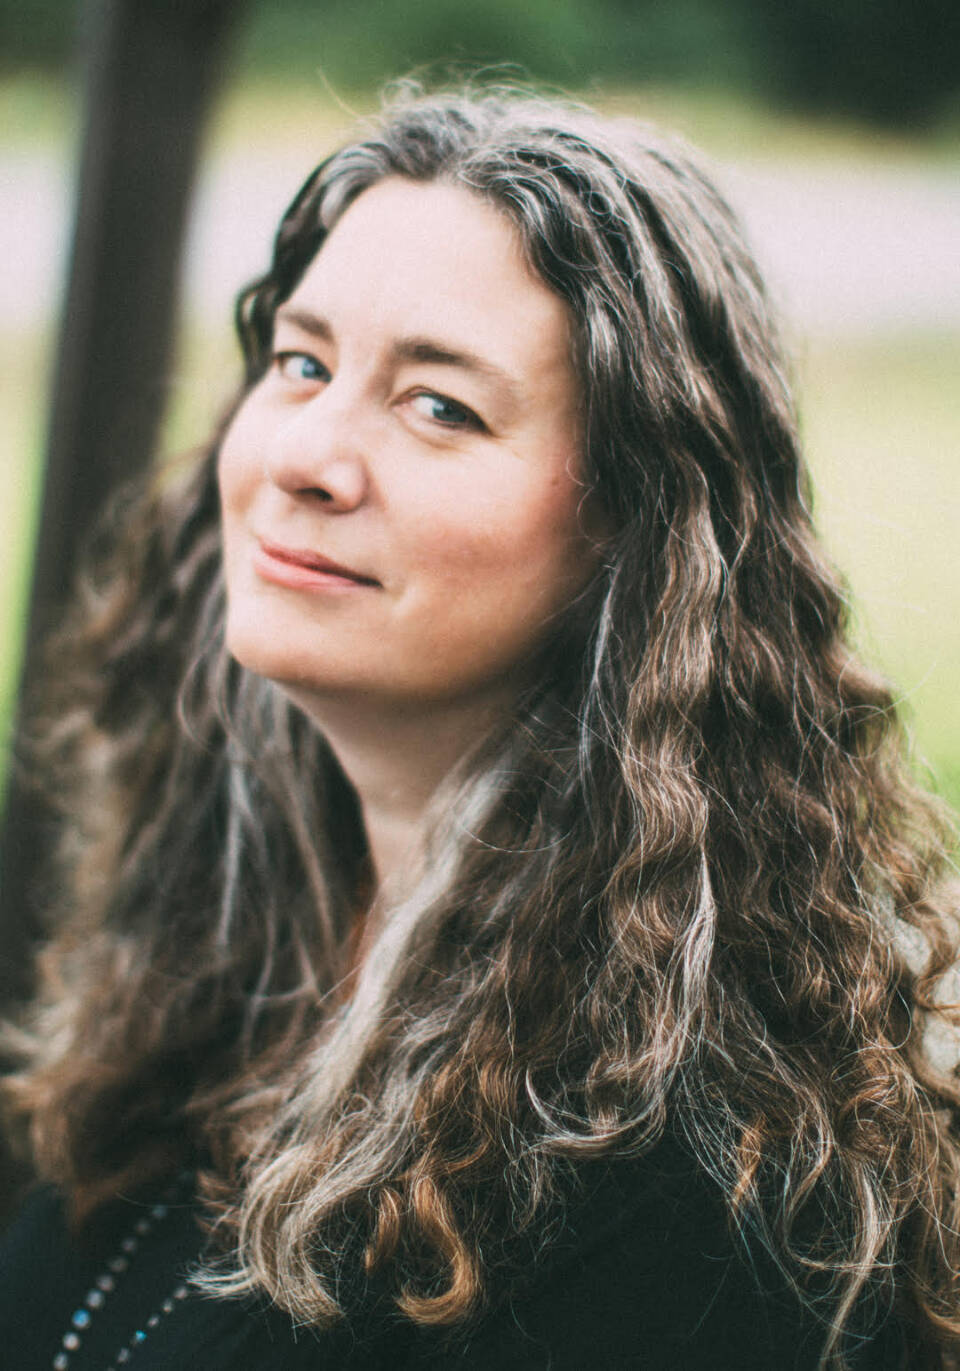 Homer writer Erin Coughlin Hollowell is photographed in 2019. Photo by Joshua Veldstra